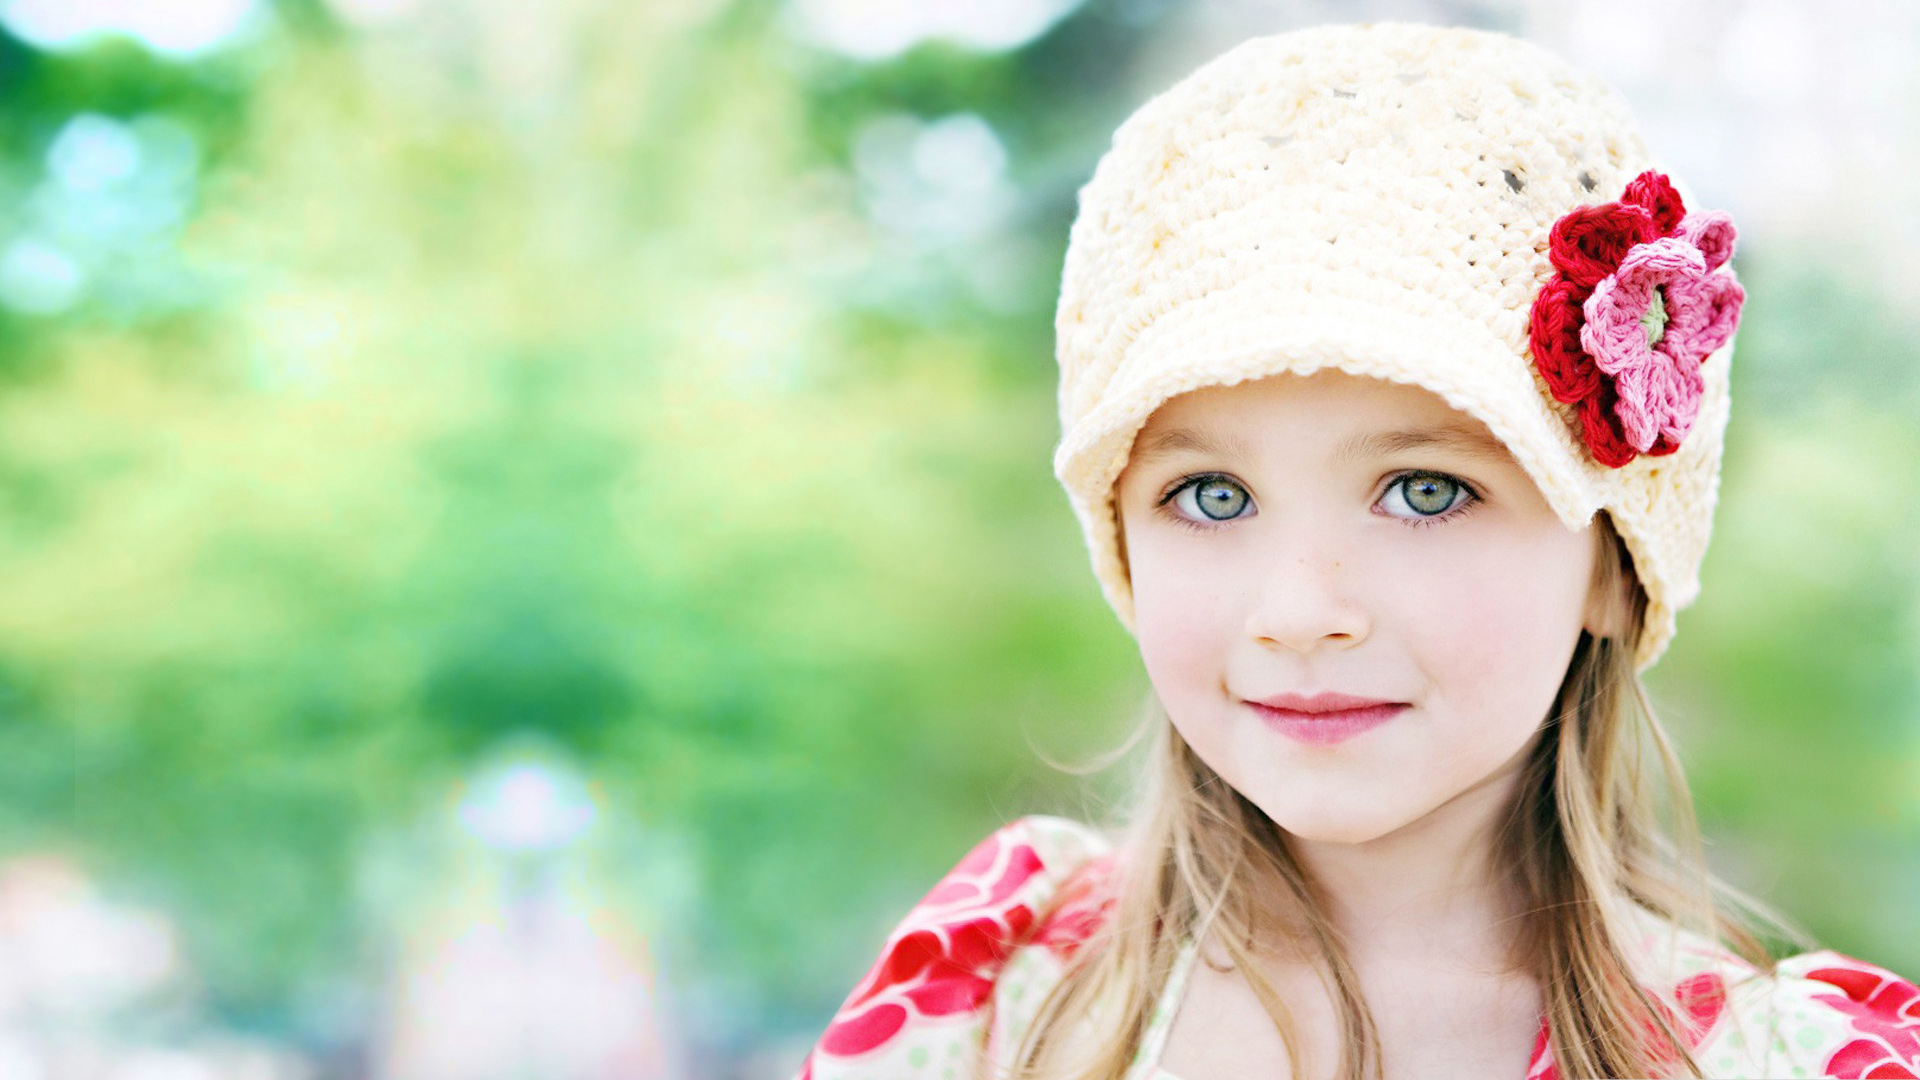 Little Girl Is Wearing Yellow And Red Dress And Wool Knitted Cap On Head Standing In Blur Wallpaper HD